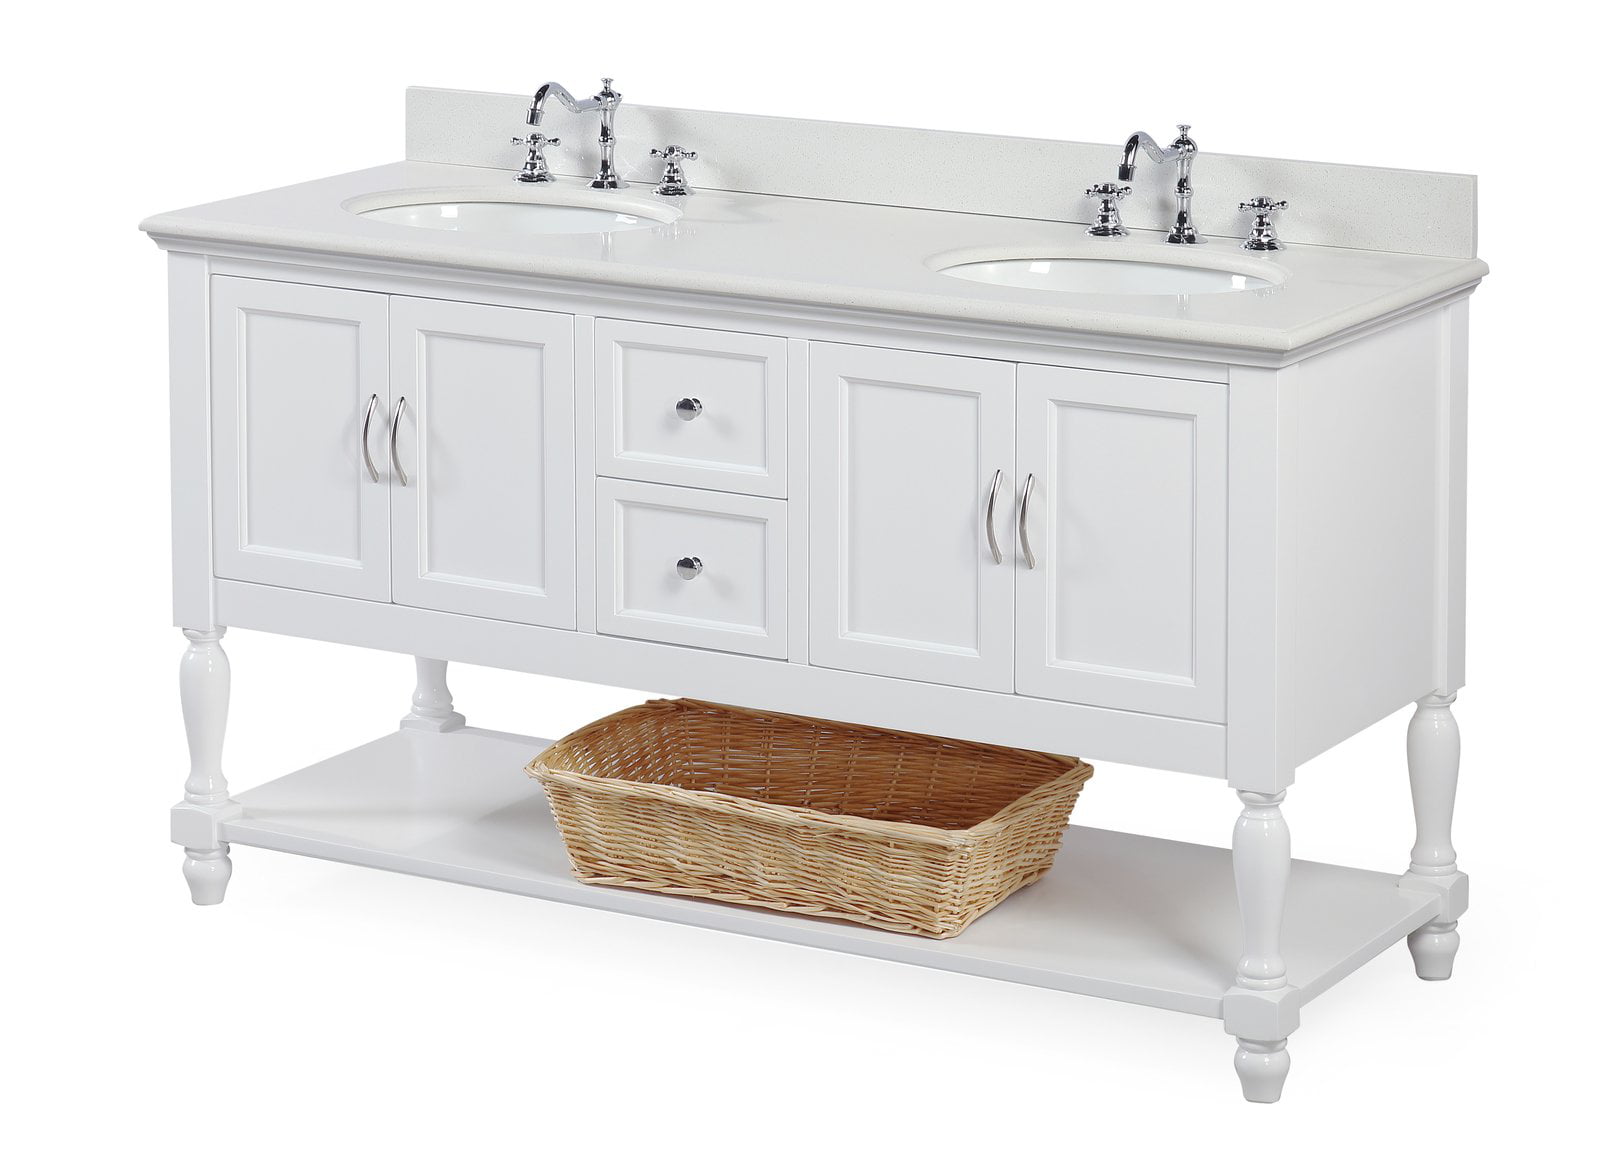 White Quartz Countertop Beverly 60-inch Single Sink Bathroom Vanity and White Ceramic Sink : Includes a White Cabinet with Soft Close Drawers Quartz/White